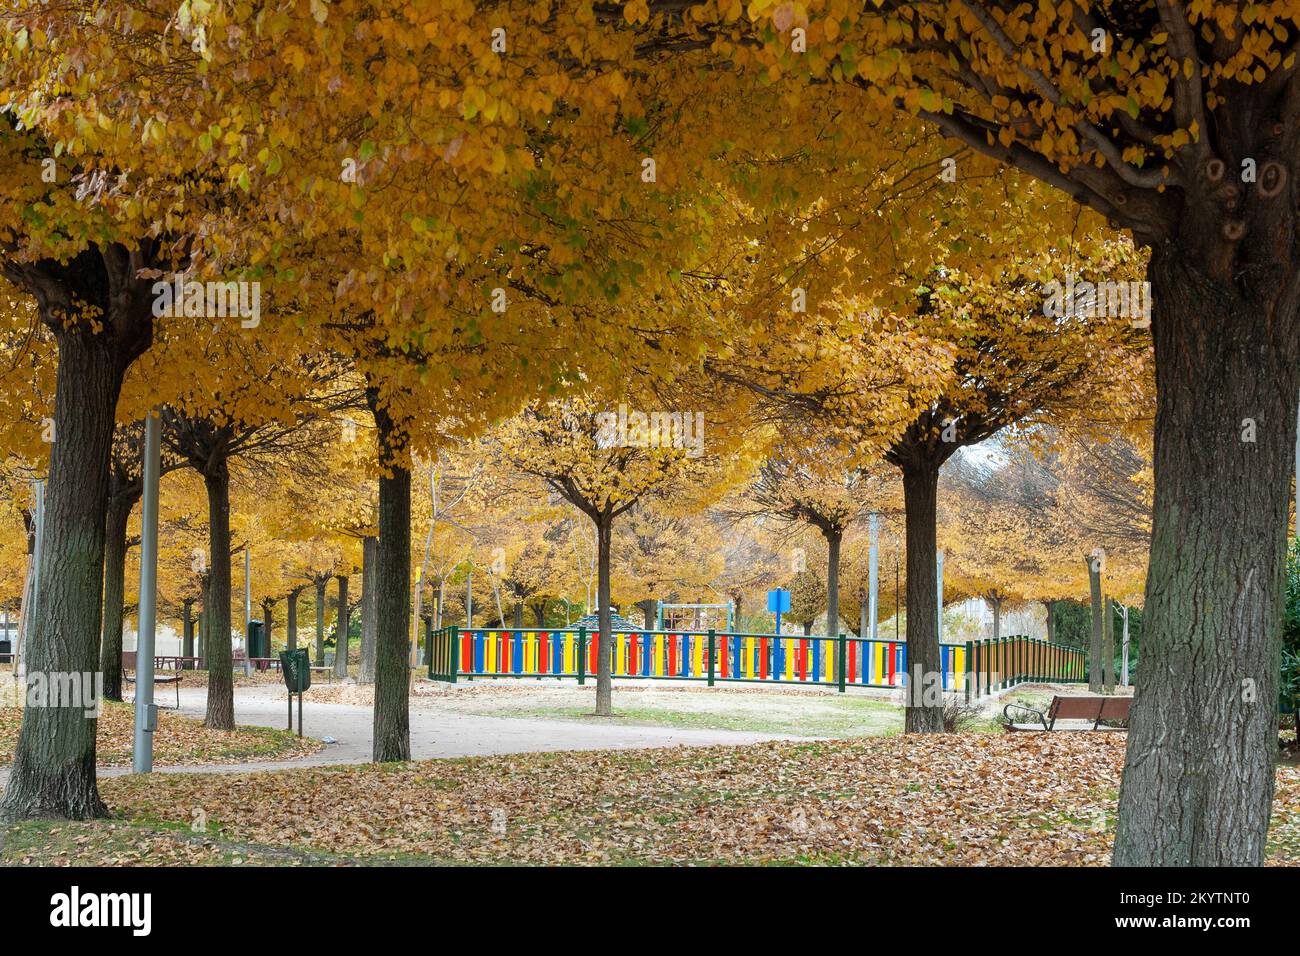 Children's playground in the city of Madrid in the autumn season where the fall and change of color of the leaves of the trees can be seen Stock Photo